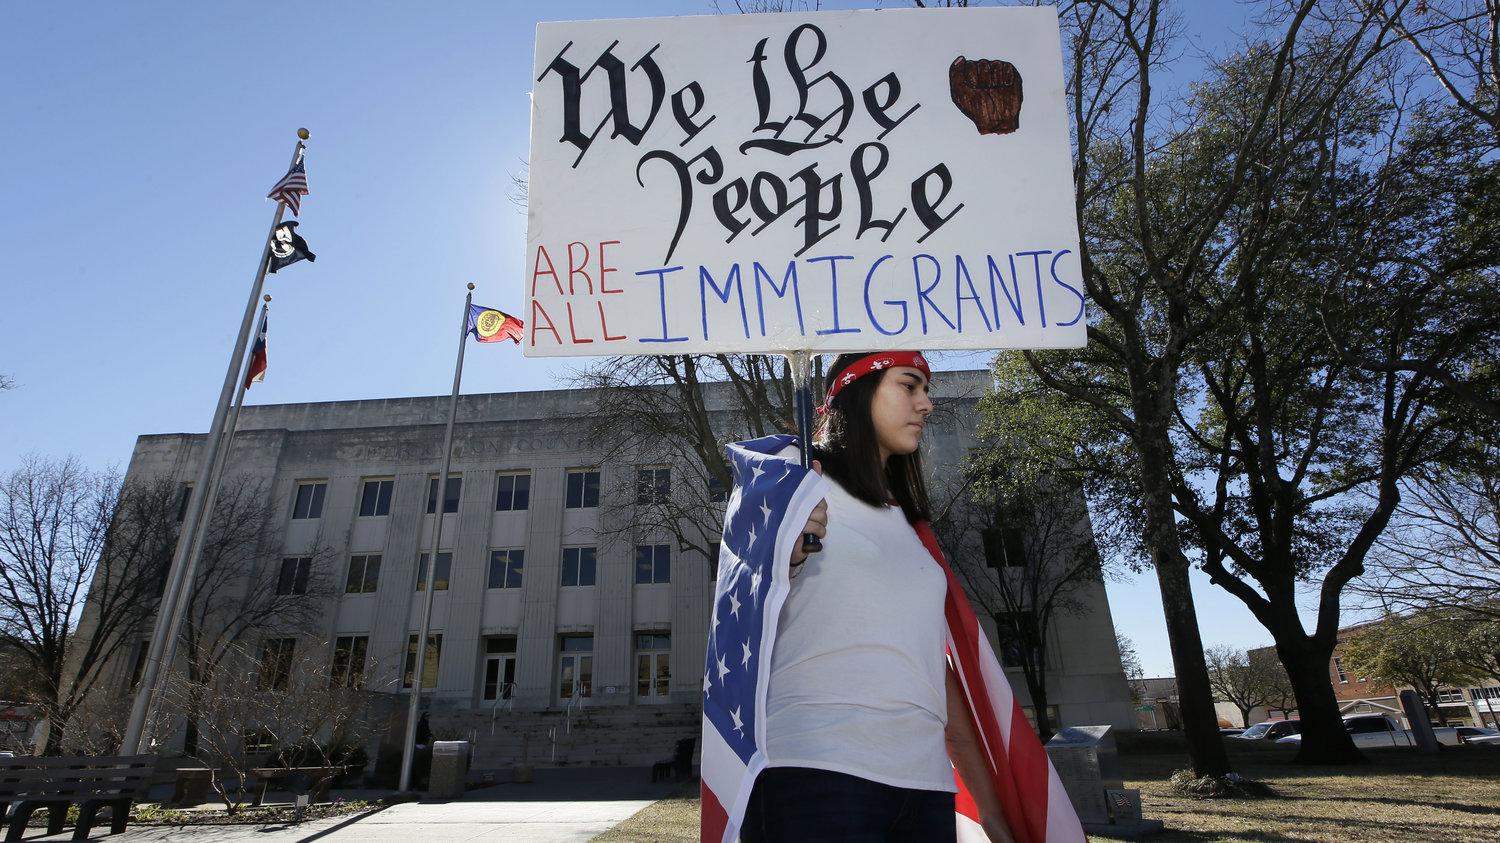 Large crowds gathered to protest during the Day Without Immigrants